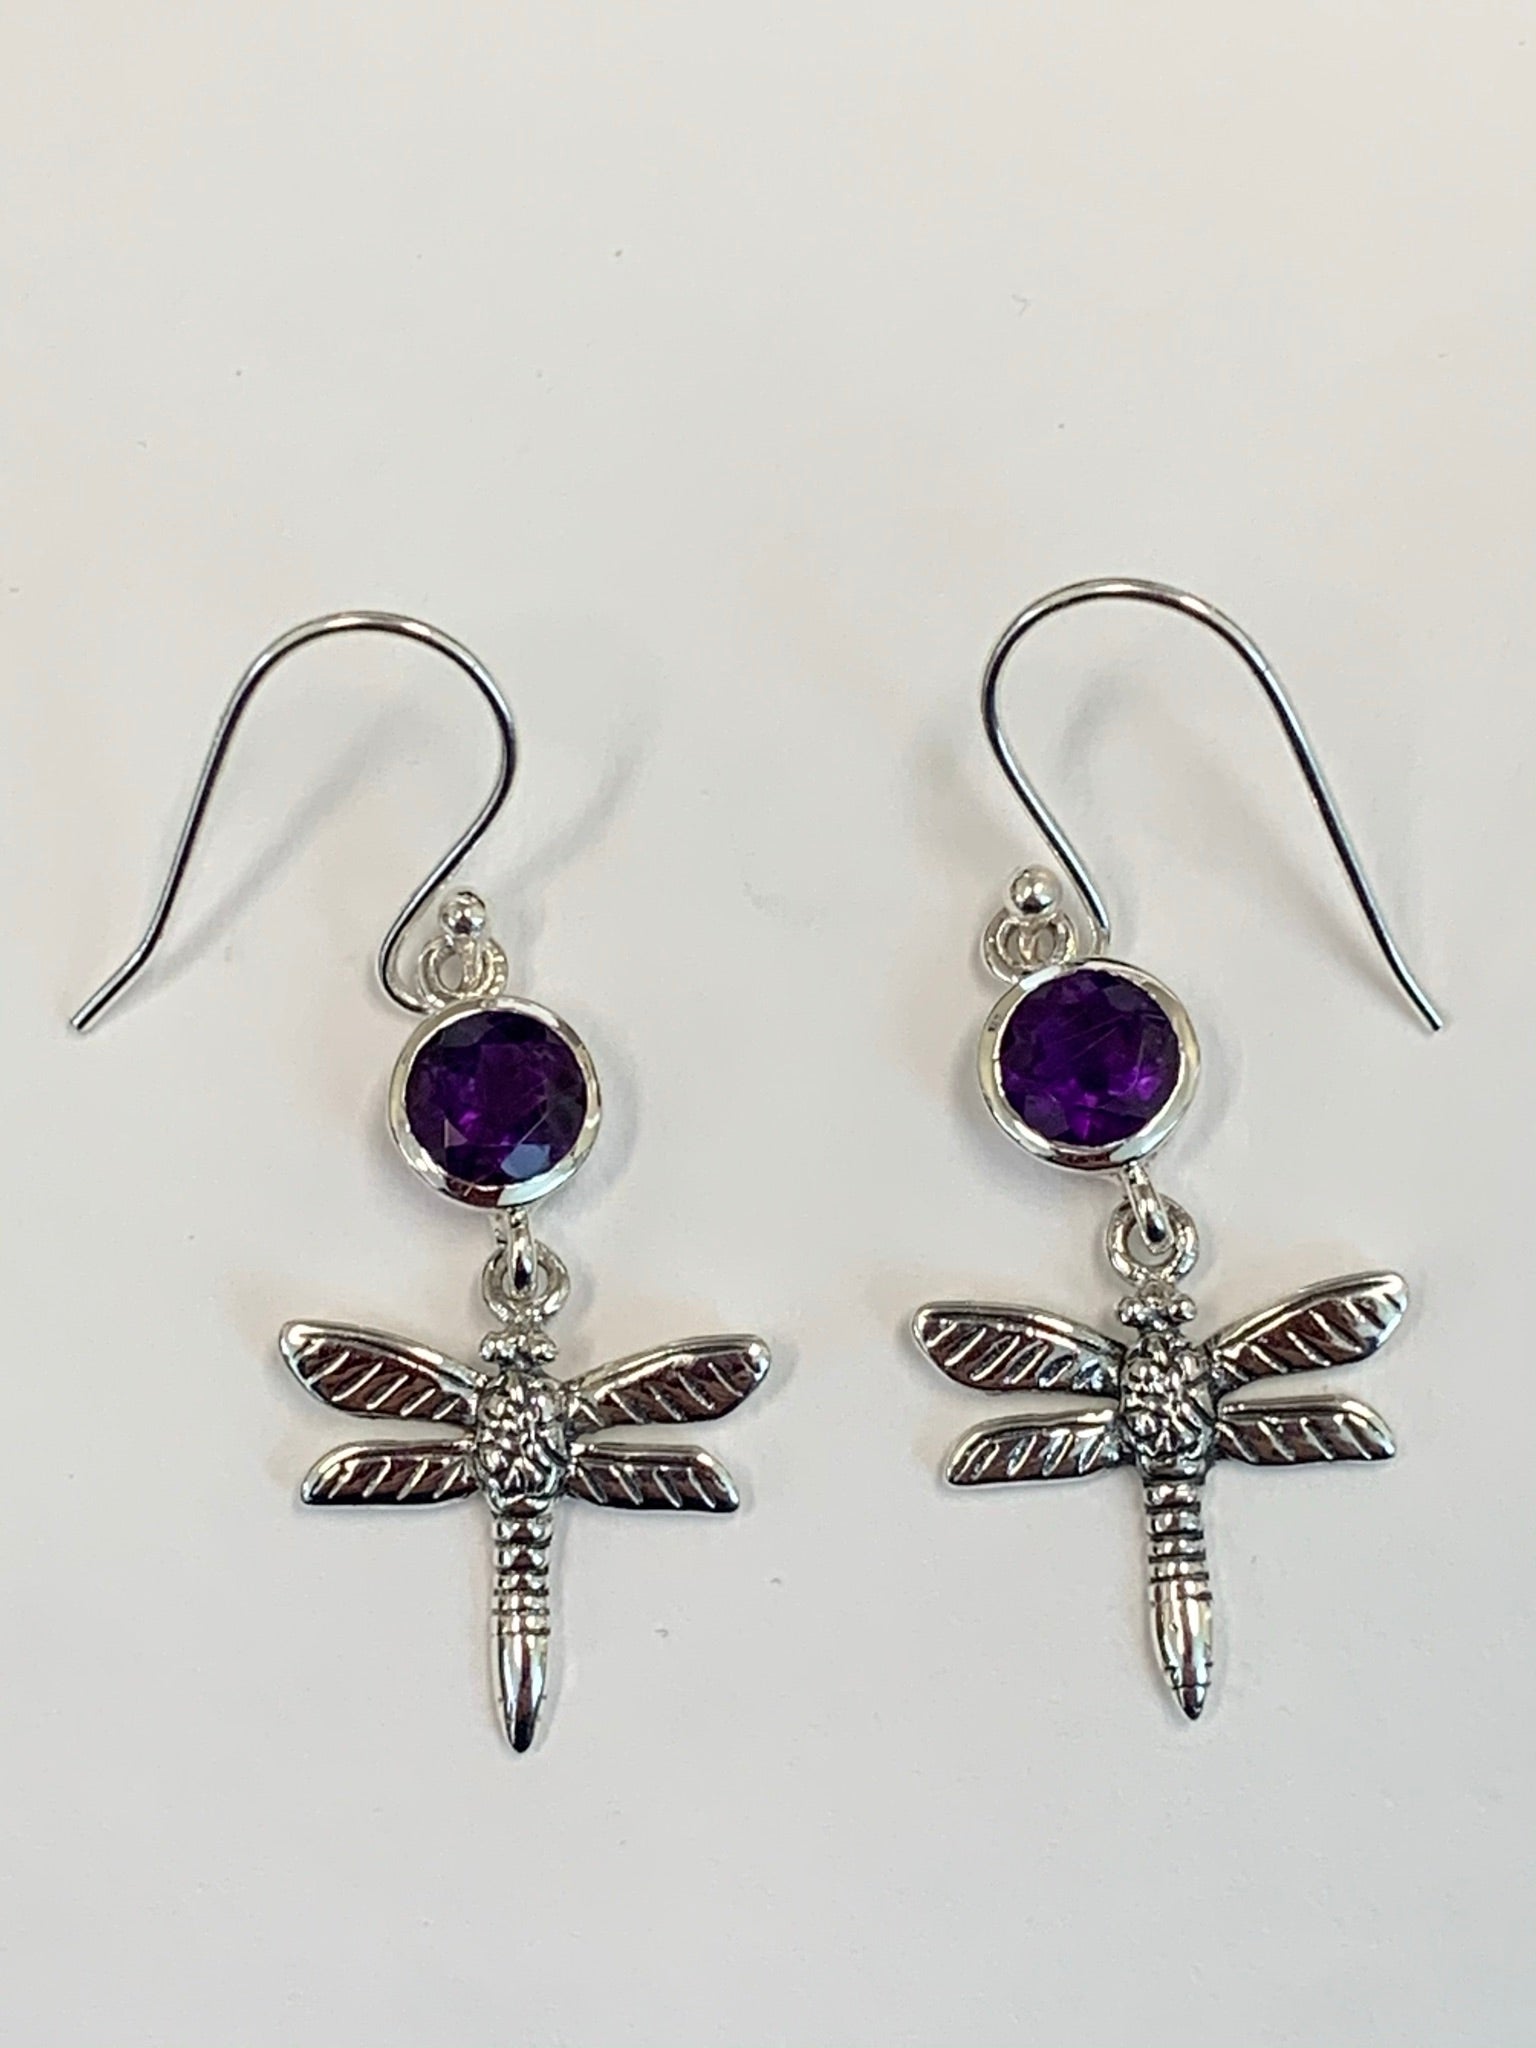 Close-up View. Round amethyst gemstones set above sterling silver dragonflies, which dangle below. These earrings are lightweight, have wires, not posts and are approximately 1¼" long.